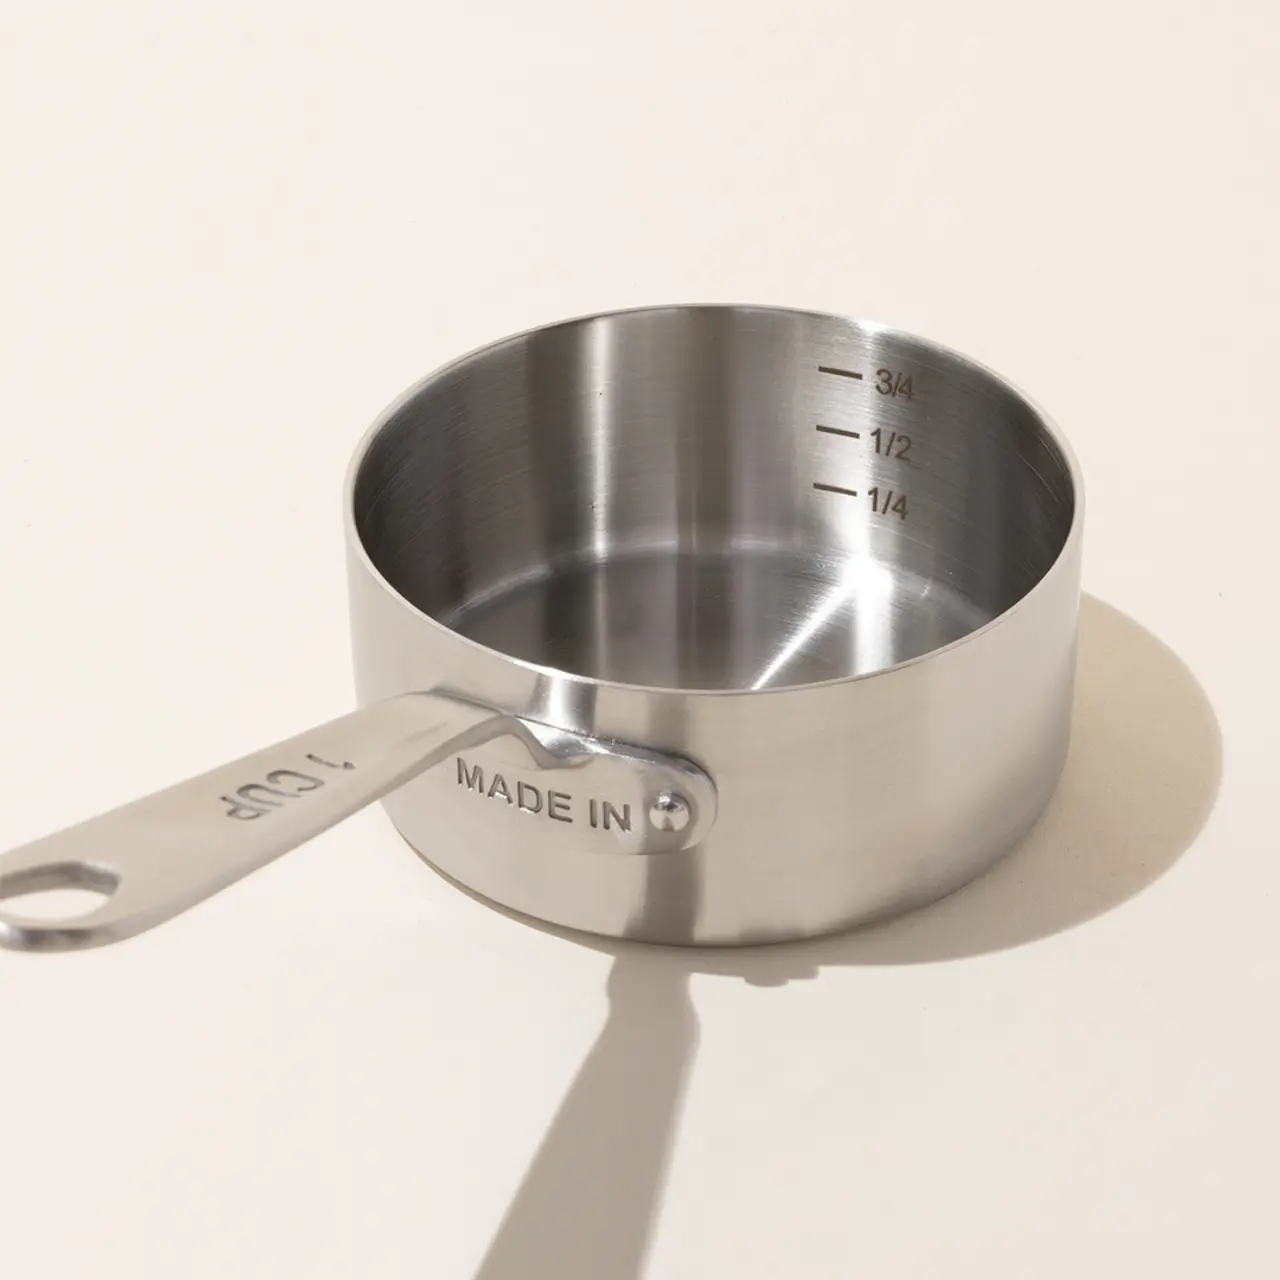 A stainless steel measuring cup with volume markings inside sits on a surface casting a soft shadow.